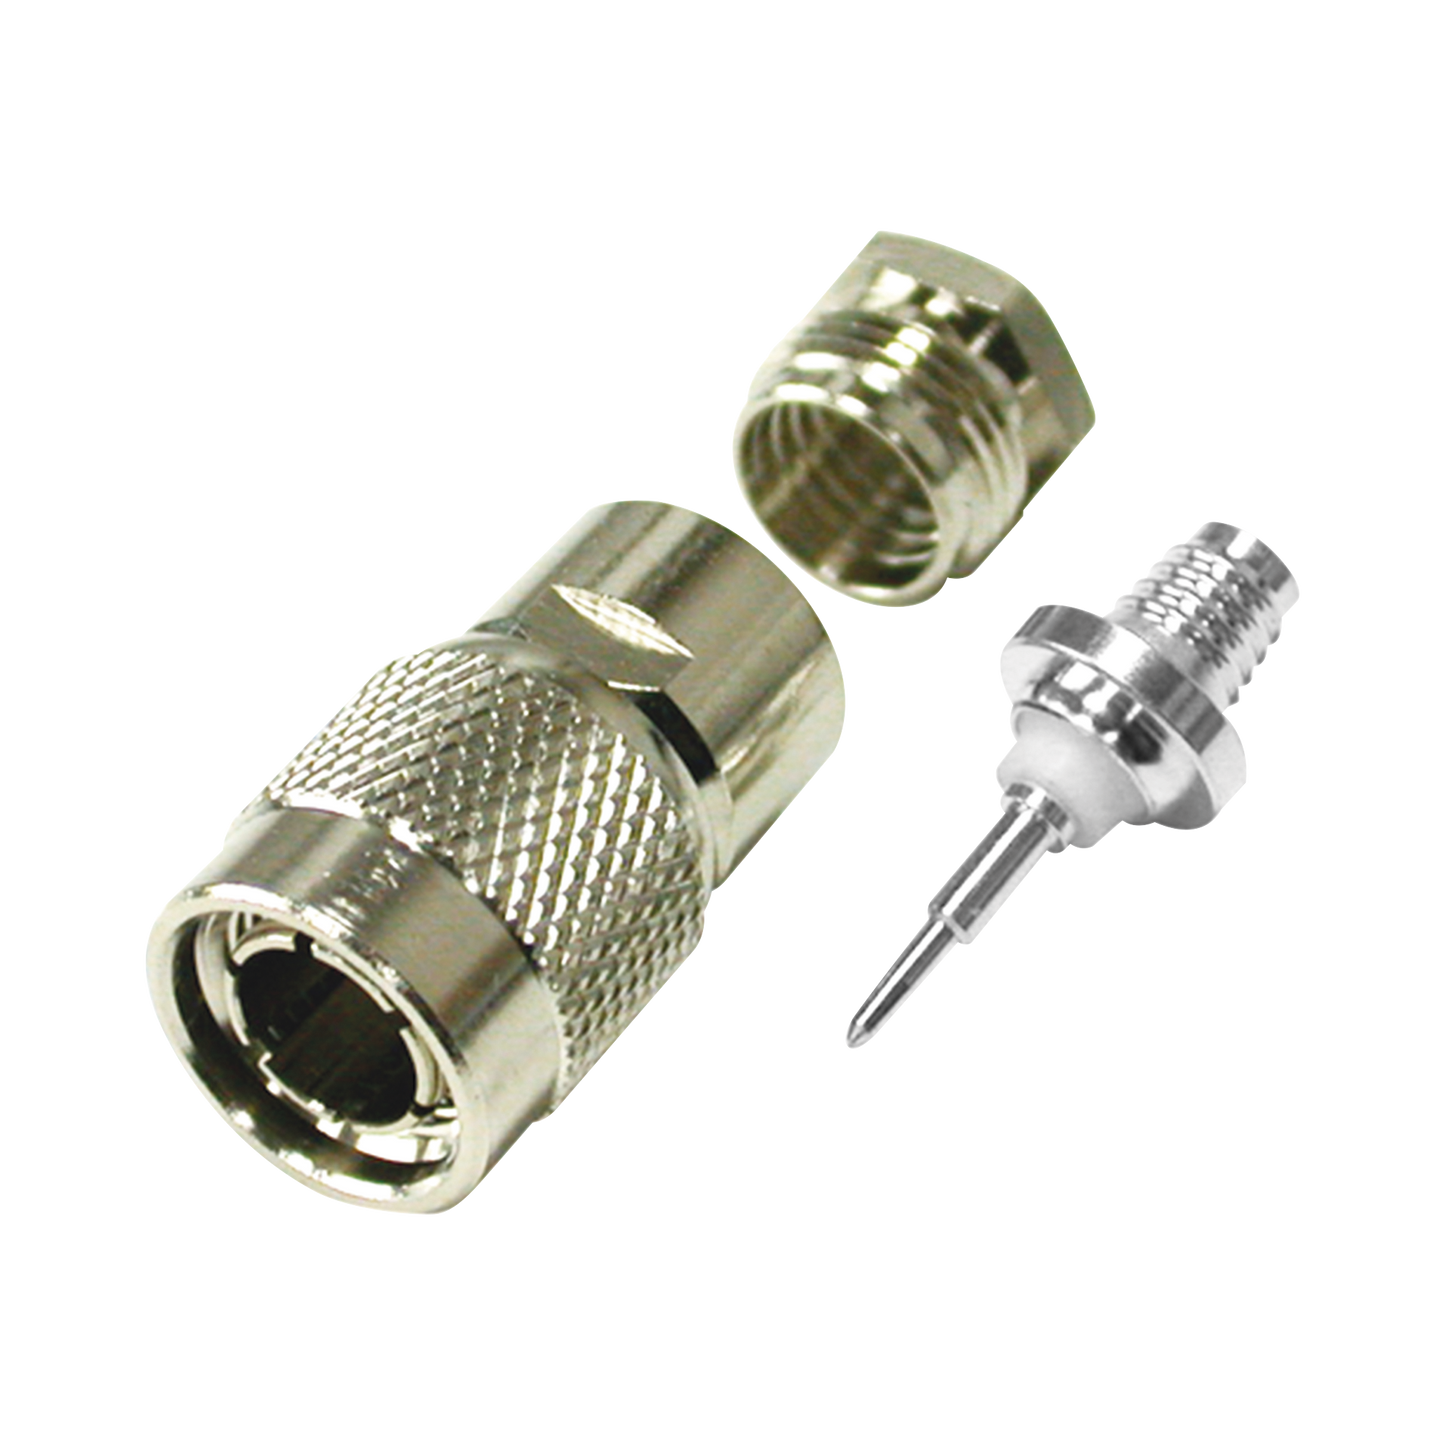 TNC Straight Male Connector to Clamp on RG-59/U and Group D 75 Ohm Nickel/ Silver/ PTFE.